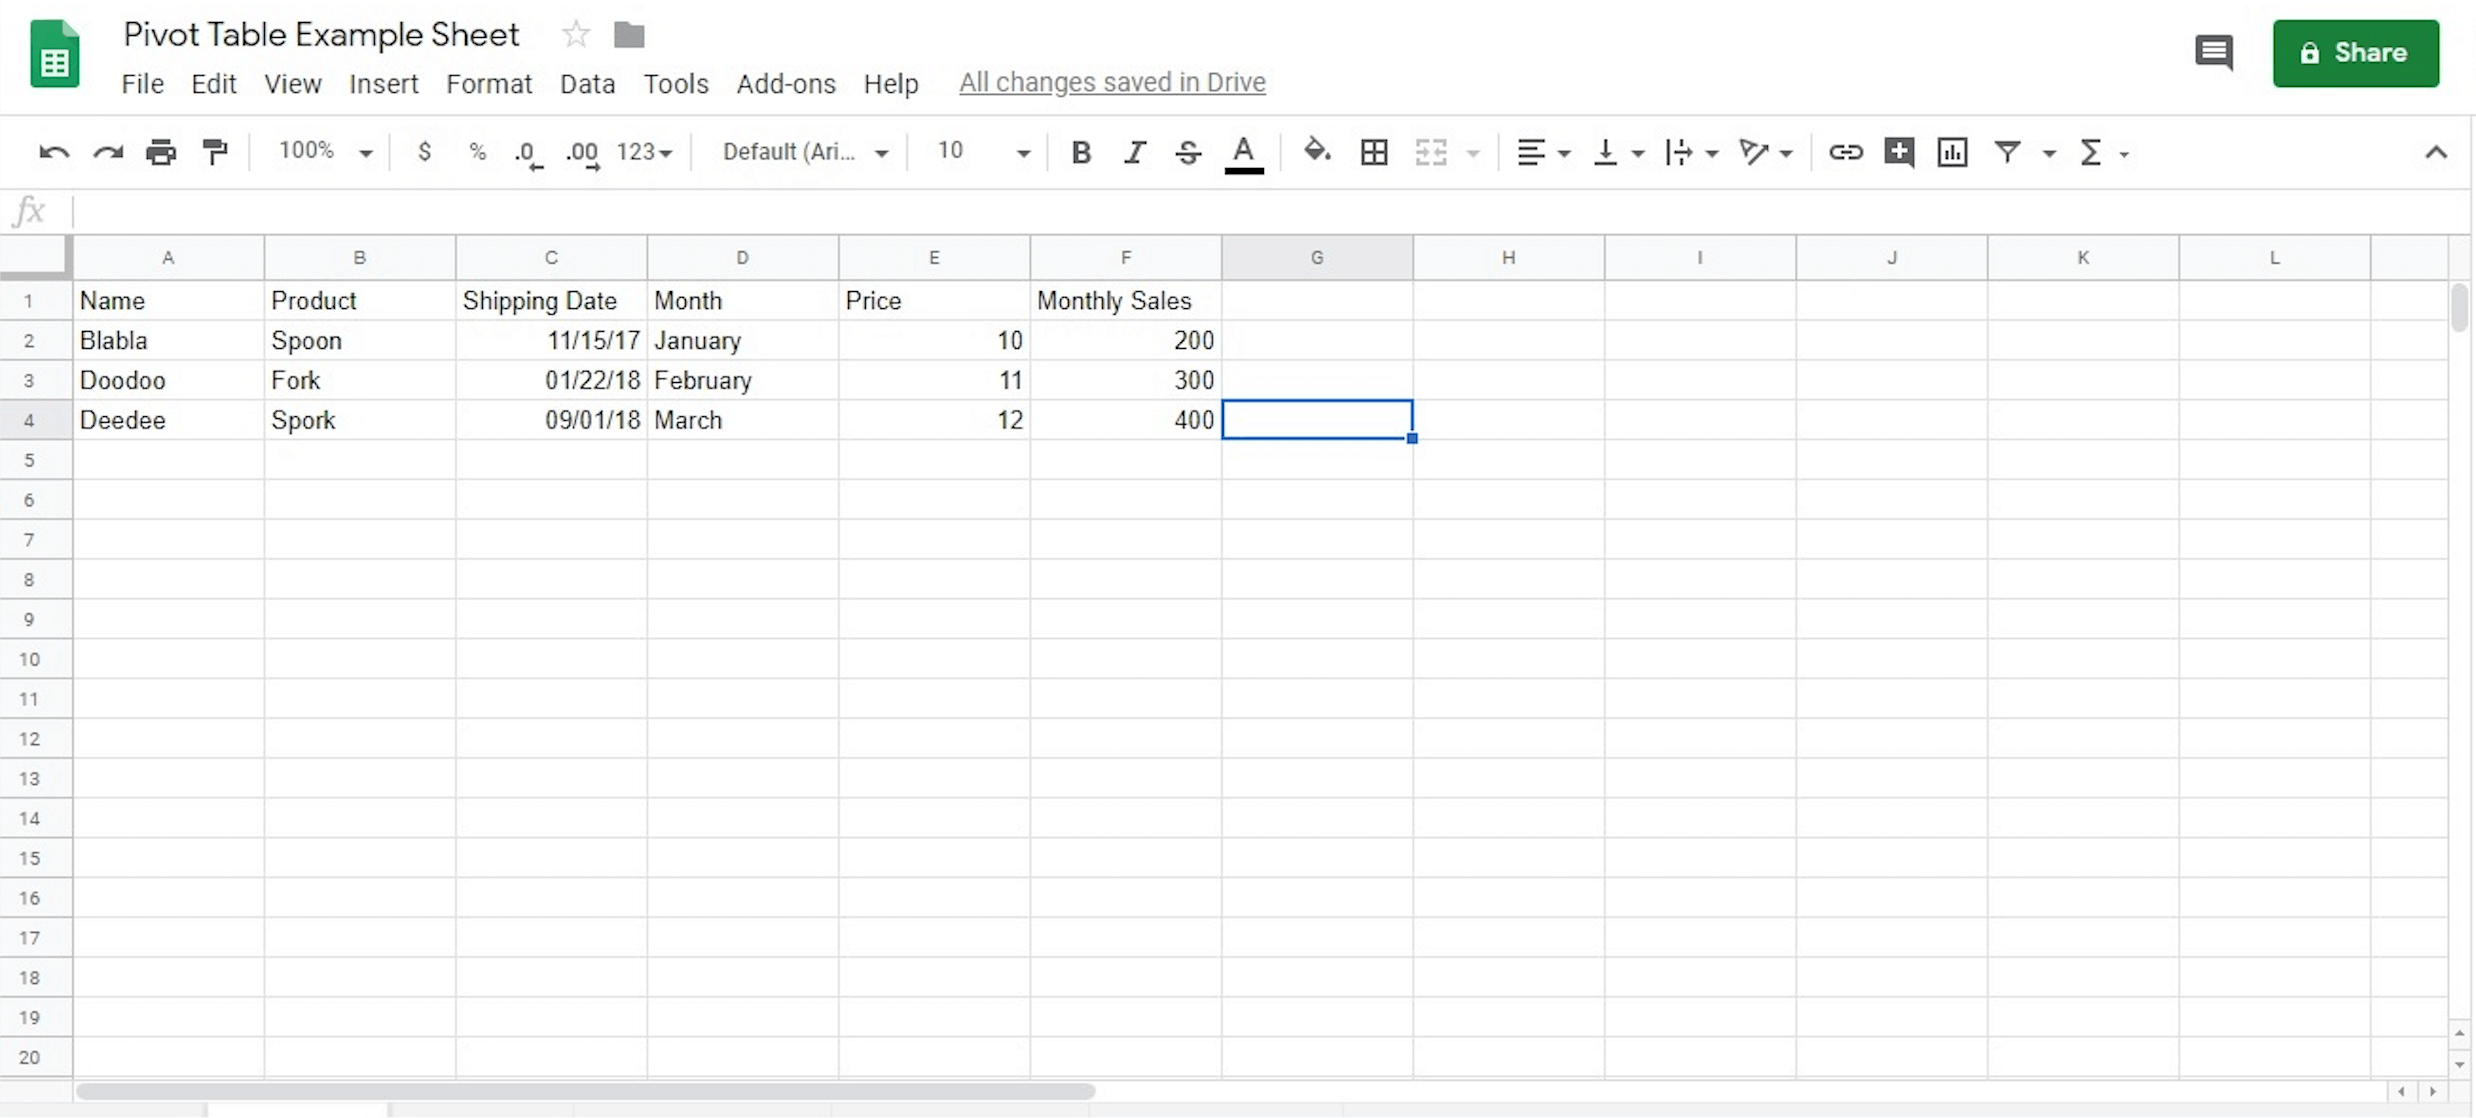 Google Sheets example table for pivot